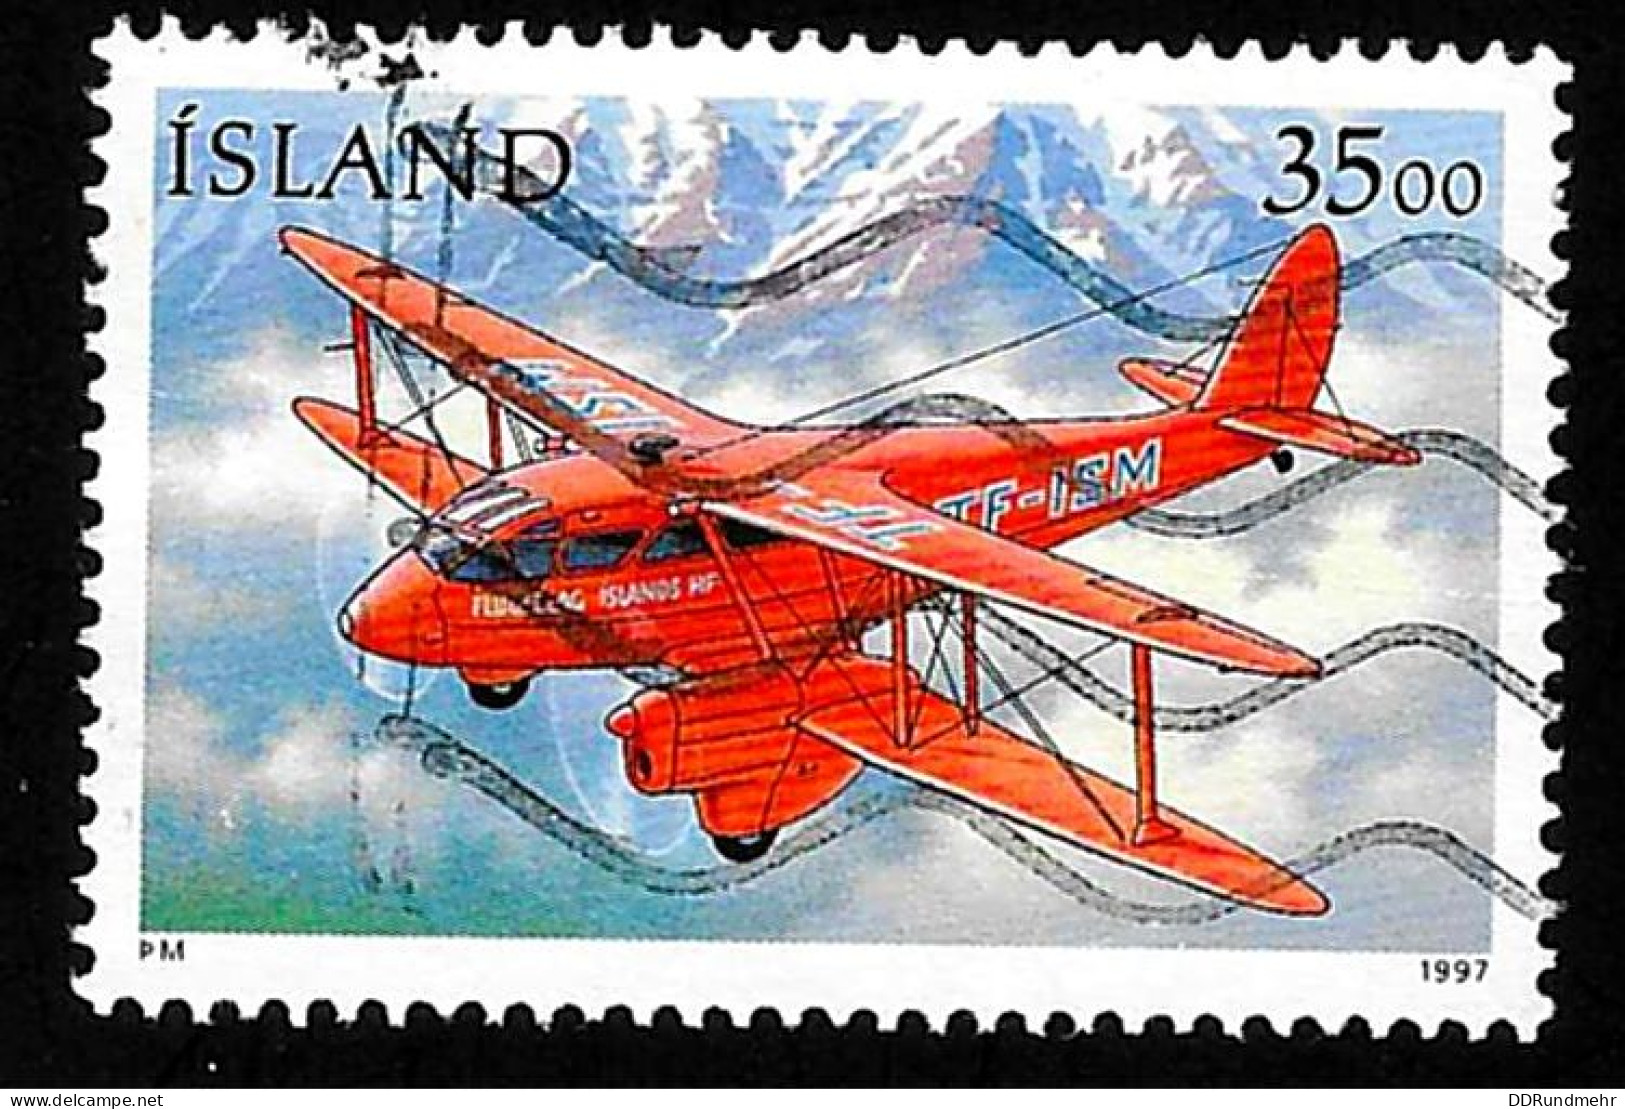 1997 Postal Aircrafts  Michel IS 866 Stamp Number IS 838 Stanley Gibbons IS 879 Used - Usati